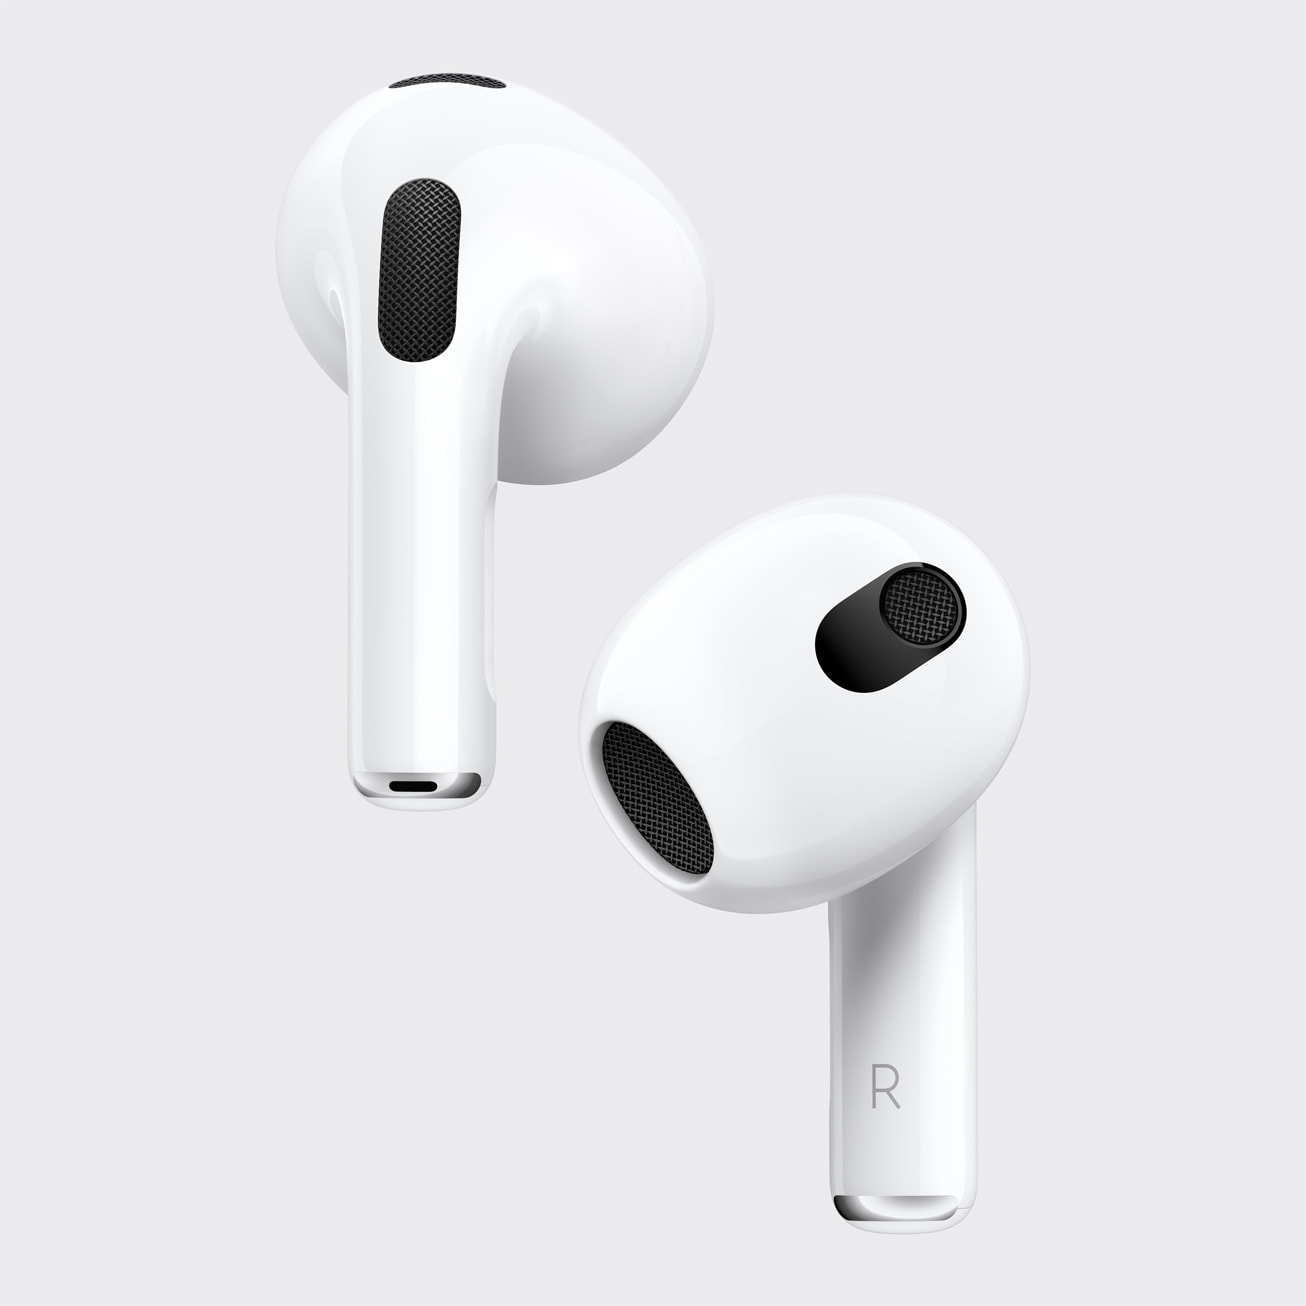 Apple Announces Third-Generation AirPods With New Contoured Design, Spatial Audio, And More